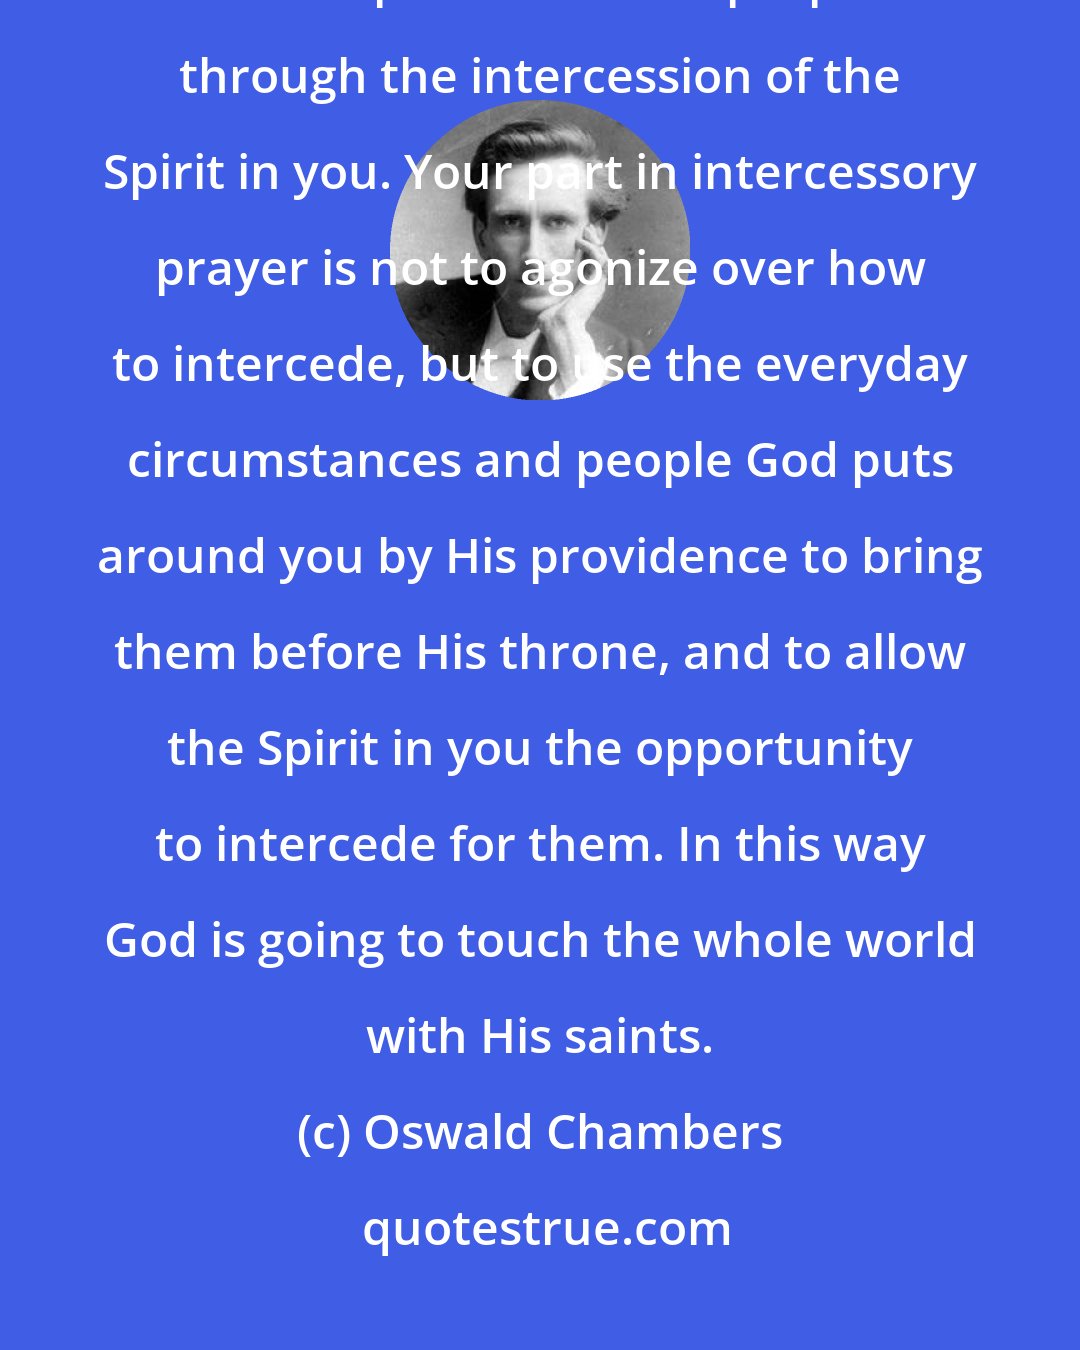 Oswald Chambers: God brings you to places, among people, and into certain conditions to accomplish a definite purpose through the intercession of the Spirit in you. Your part in intercessory prayer is not to agonize over how to intercede, but to use the everyday circumstances and people God puts around you by His providence to bring them before His throne, and to allow the Spirit in you the opportunity to intercede for them. In this way God is going to touch the whole world with His saints.